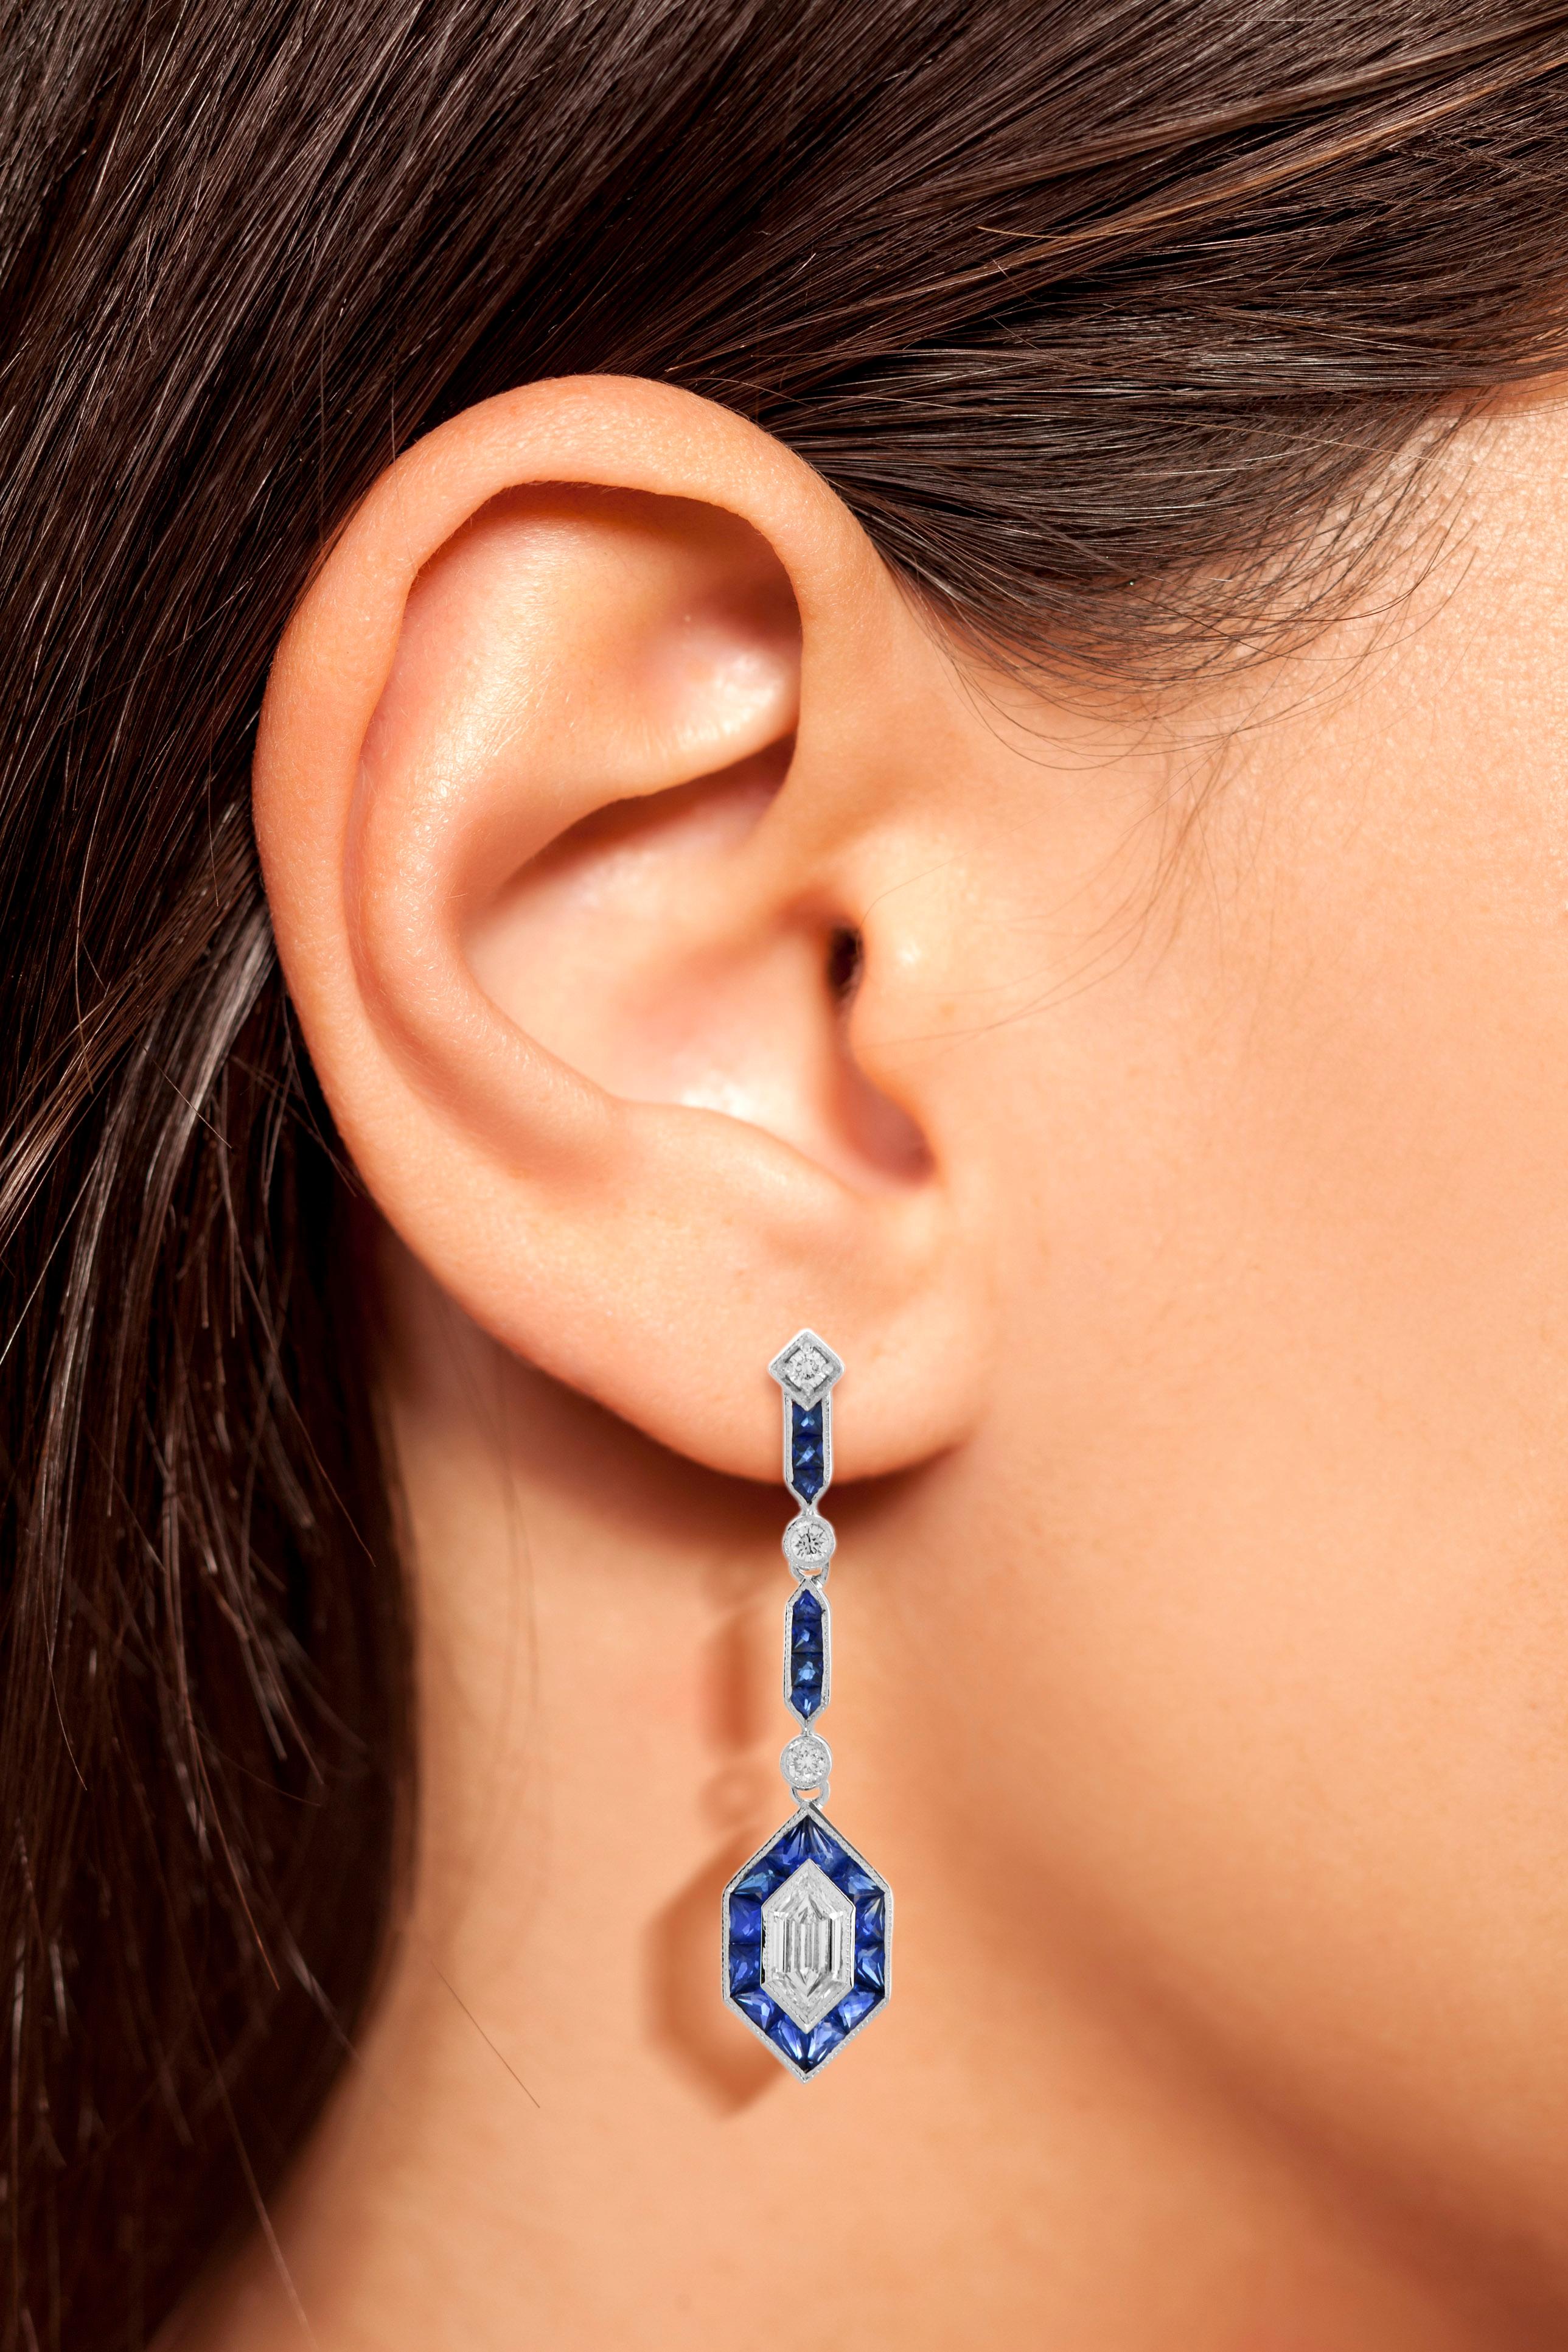 These Art Deco inspired drop earrings features 0.87 carats of total diamonds and 2.75 blue sapphires finished in a dazzling 18k white gold setting. Both glamorous and imaginative, these drop earrings could be the show stopper addition to your